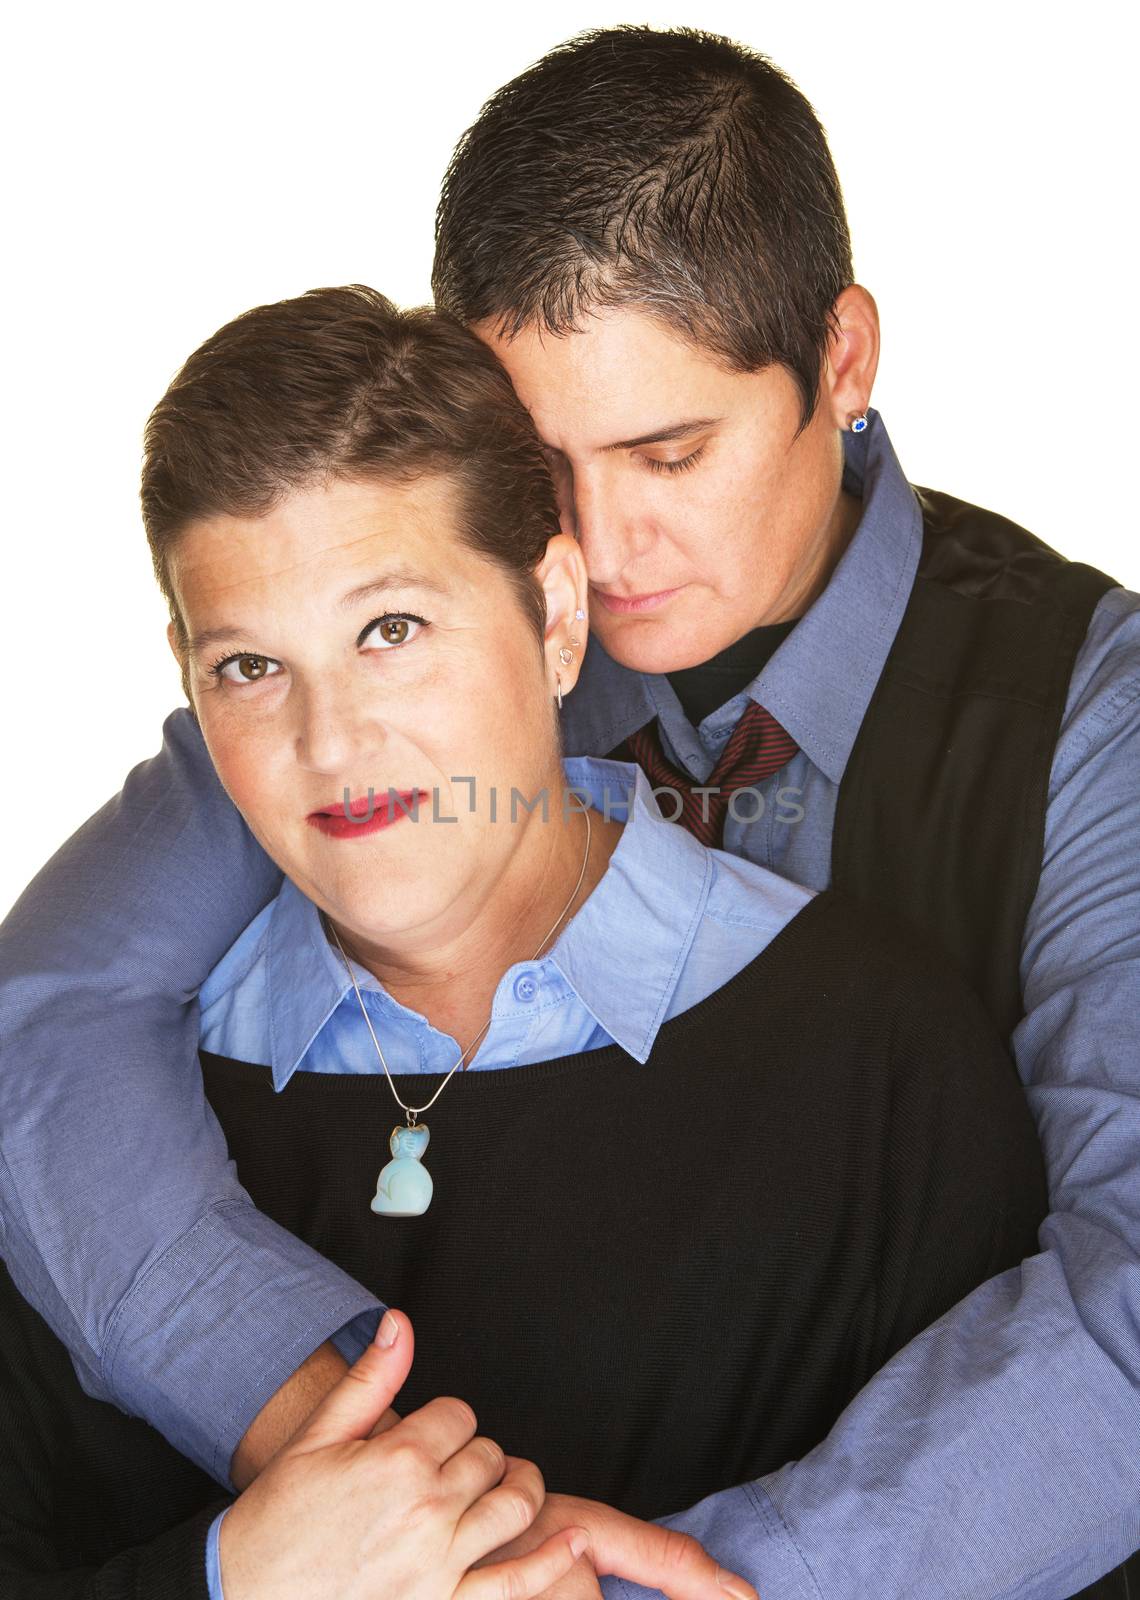 Calm lesbian couple over isolated background holding each other